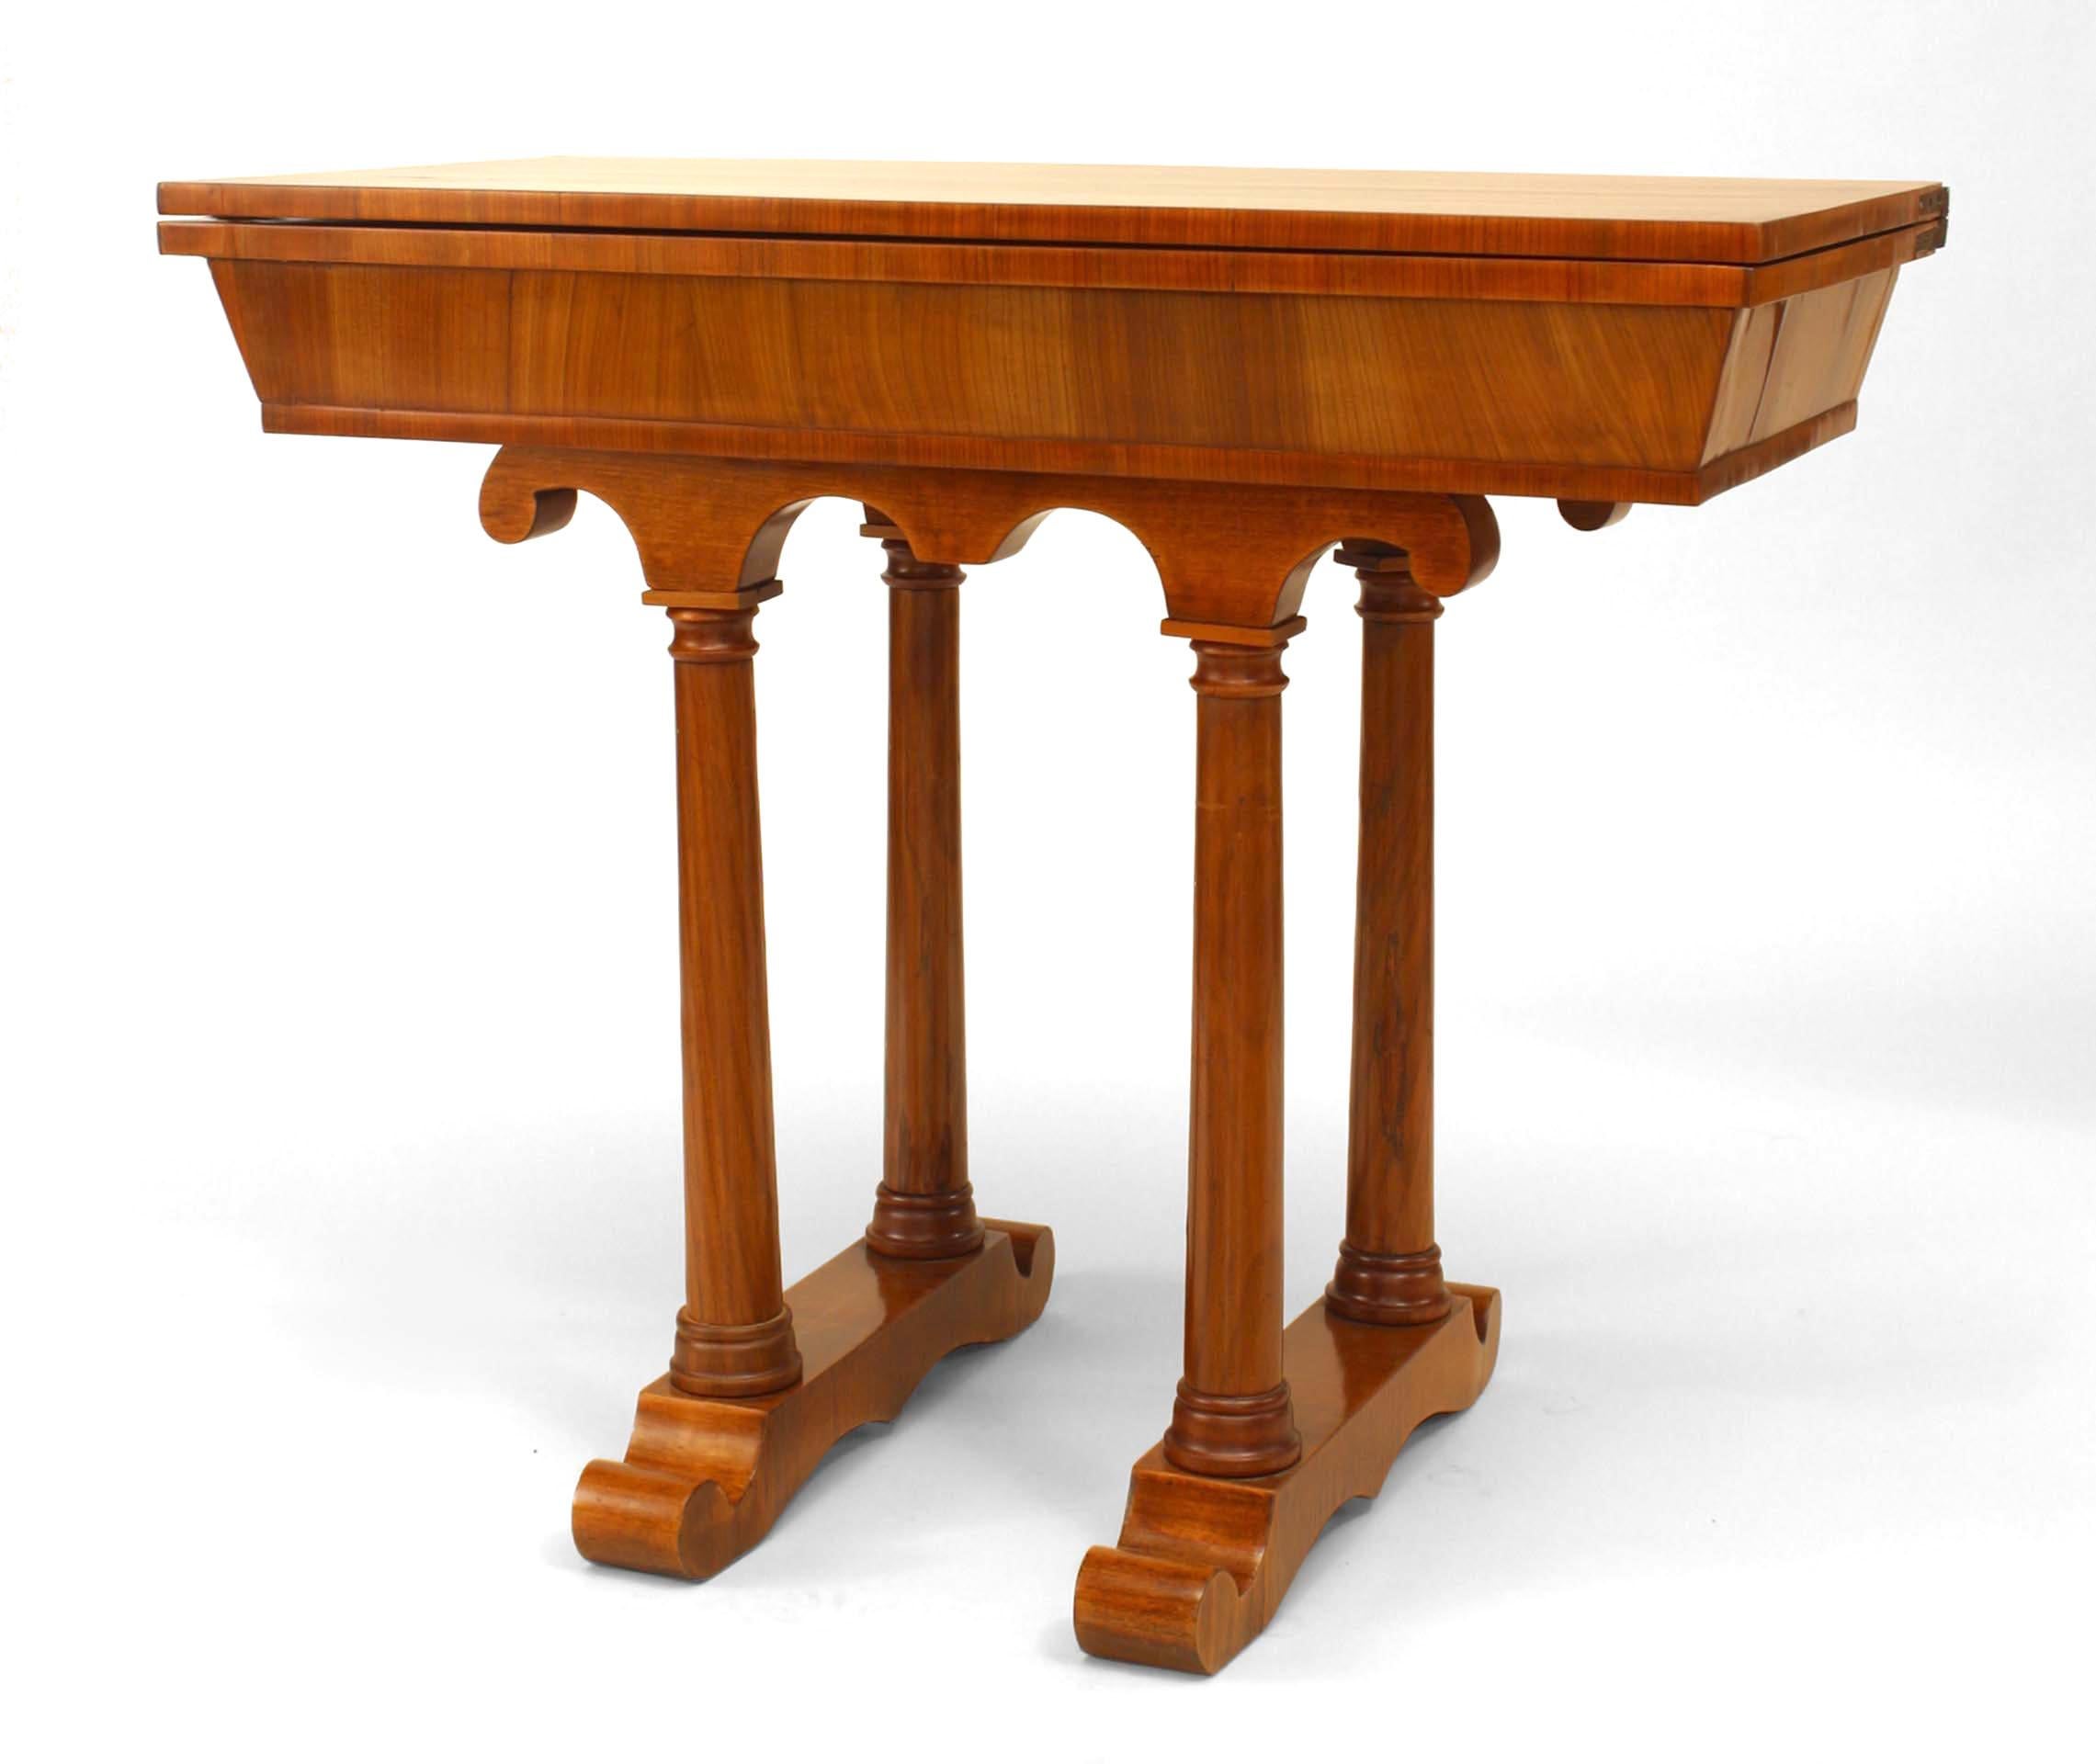 Austrian Biedermeier cherrywood console or flip top game table dating to the second quarter of the nineteenth century. The piece features double column design pedestals supported on a rectangular base. When opened, it shows a green felt game top.